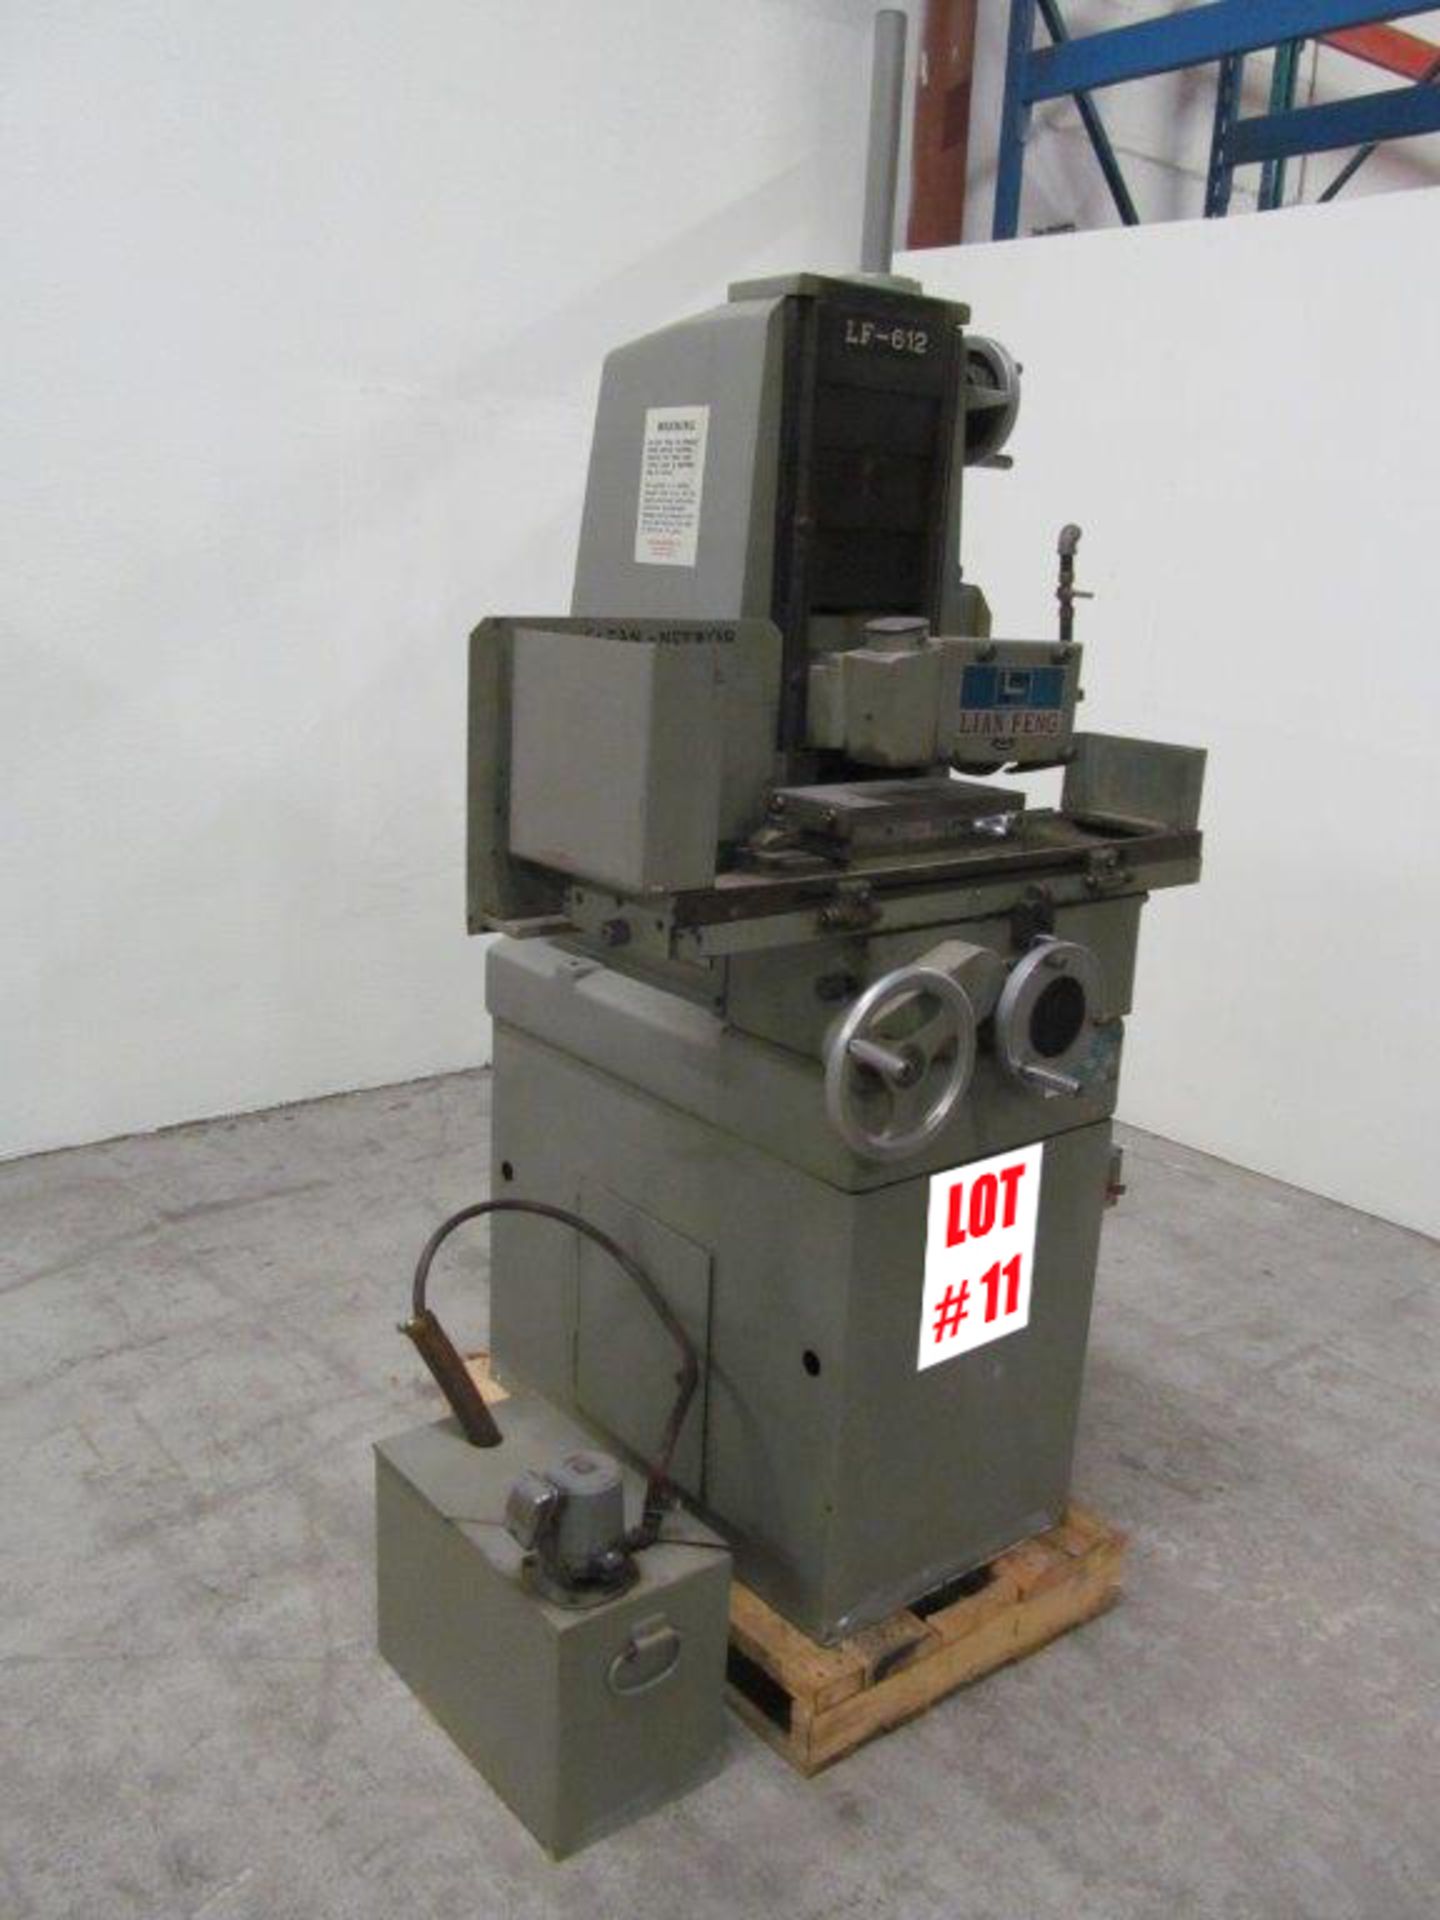 LIAN FENG HYDRAULIC SURFACE GRINDER MODEL LF-12, S/N: 73332, CAPACITY: 6" X 12" C/W ECLIPSE MAGNETIC